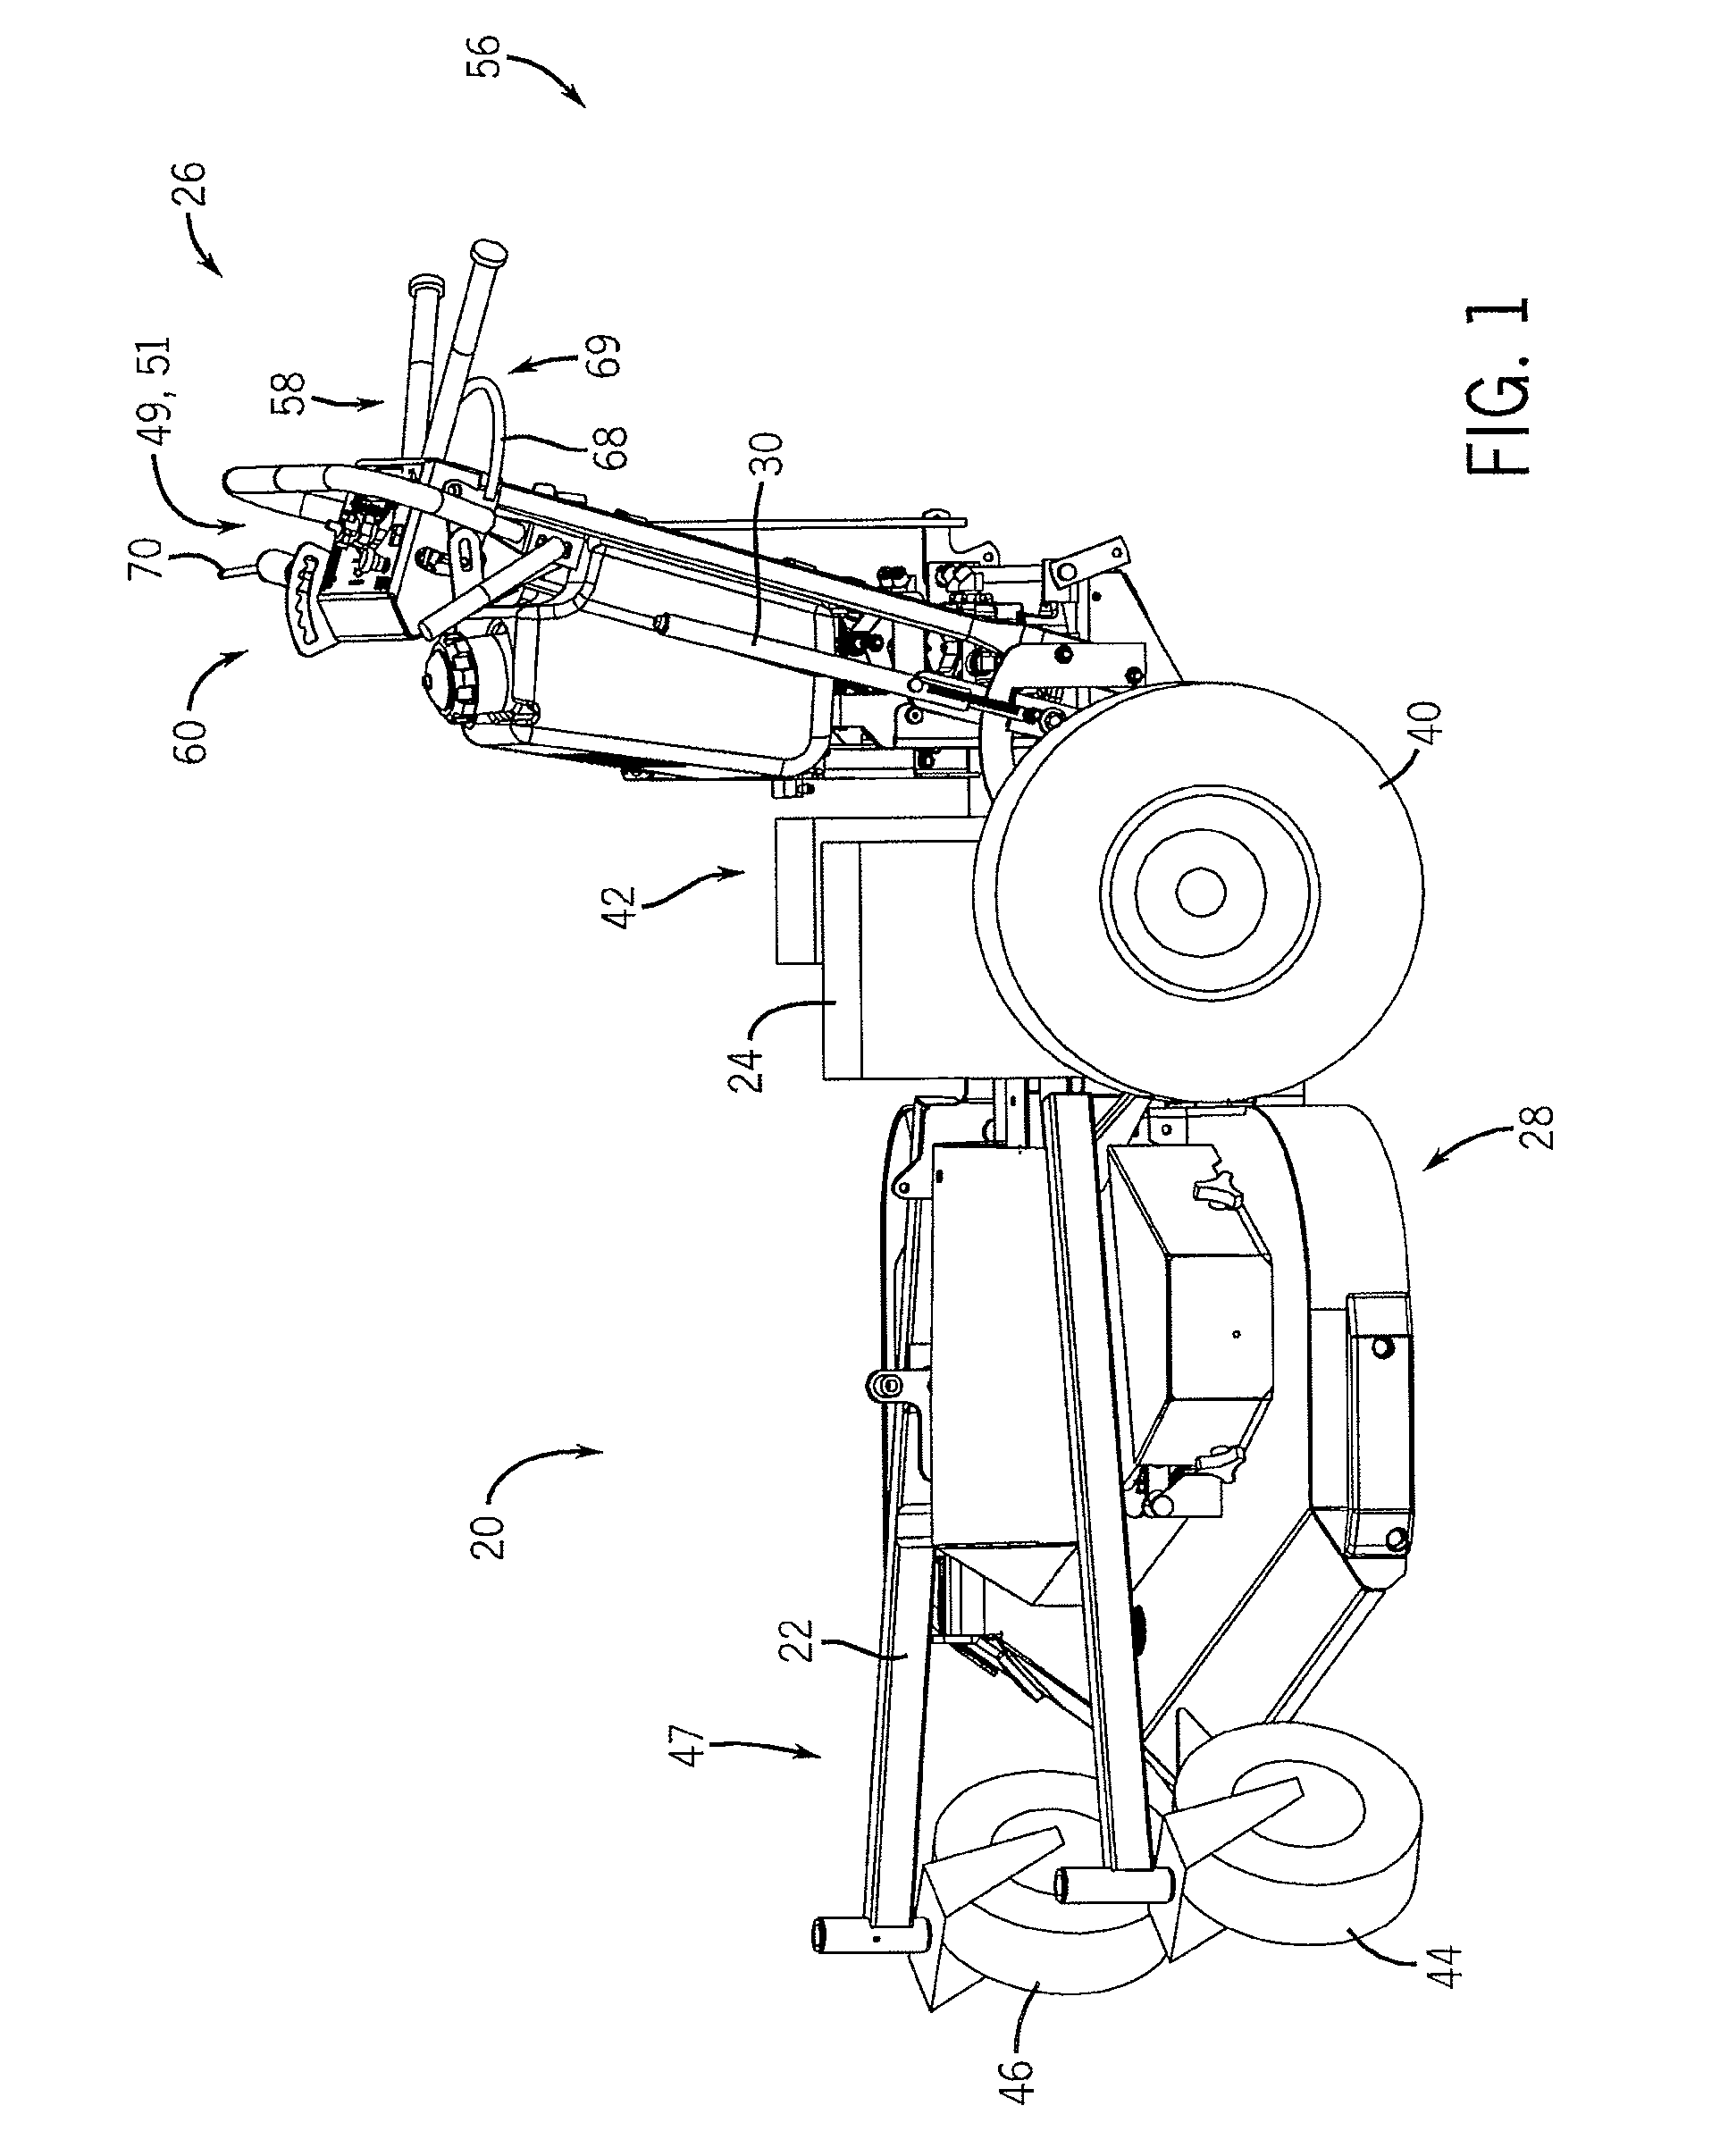 Vehicle steering and speed control